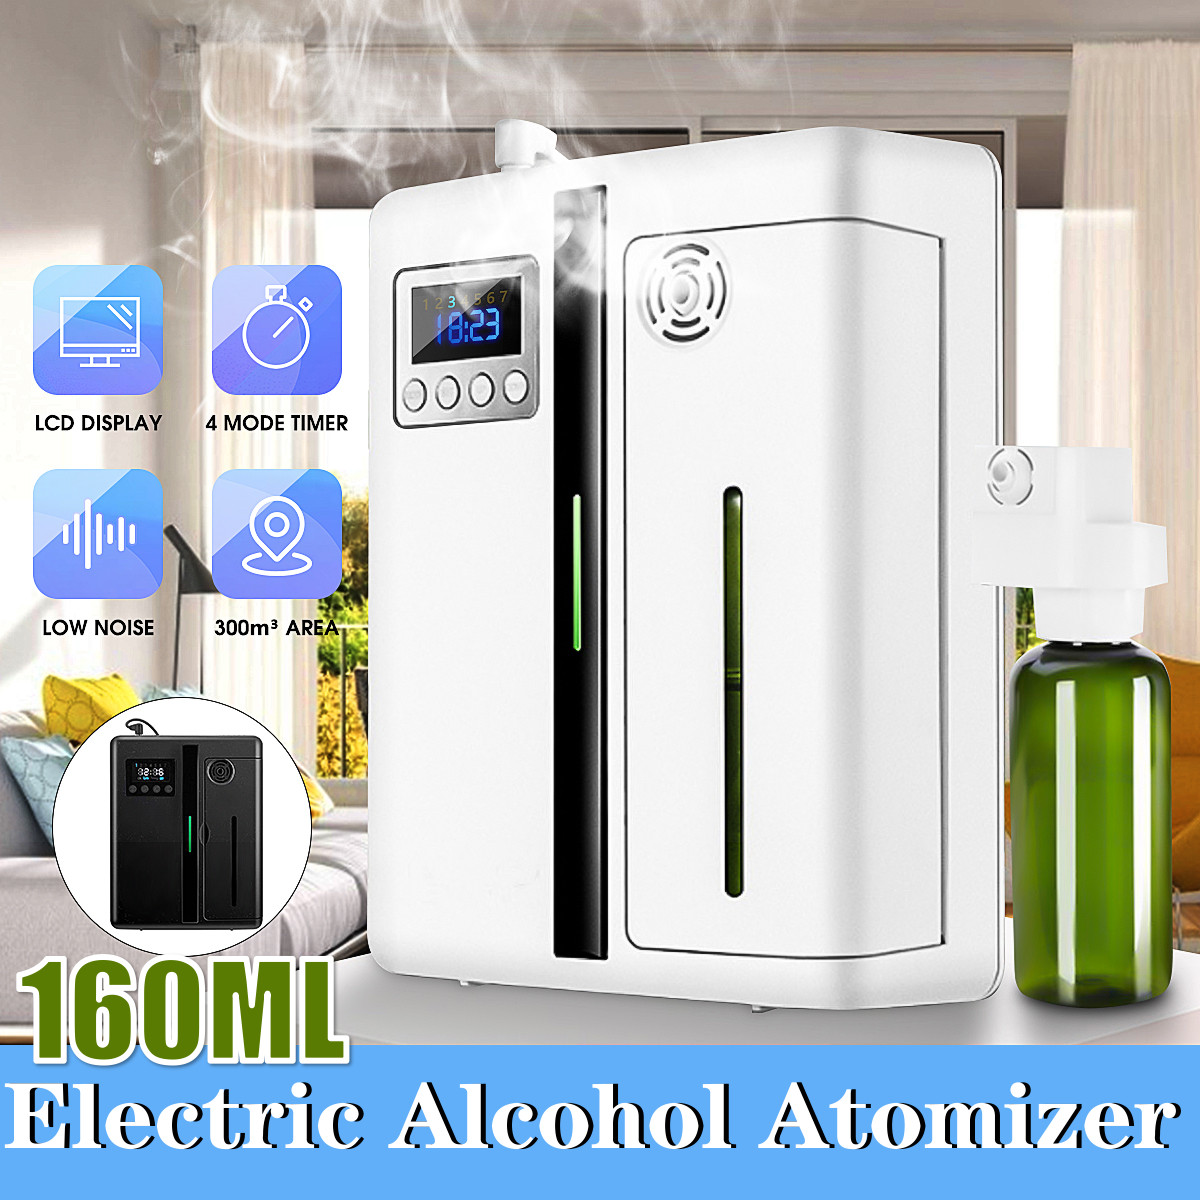 33W-12V-160ml-Essential-Scented-Oil-Aroma-Diffuser-Humidifier-Aroma-Fragrance-Machine-For-Home-Holte-1855257-1